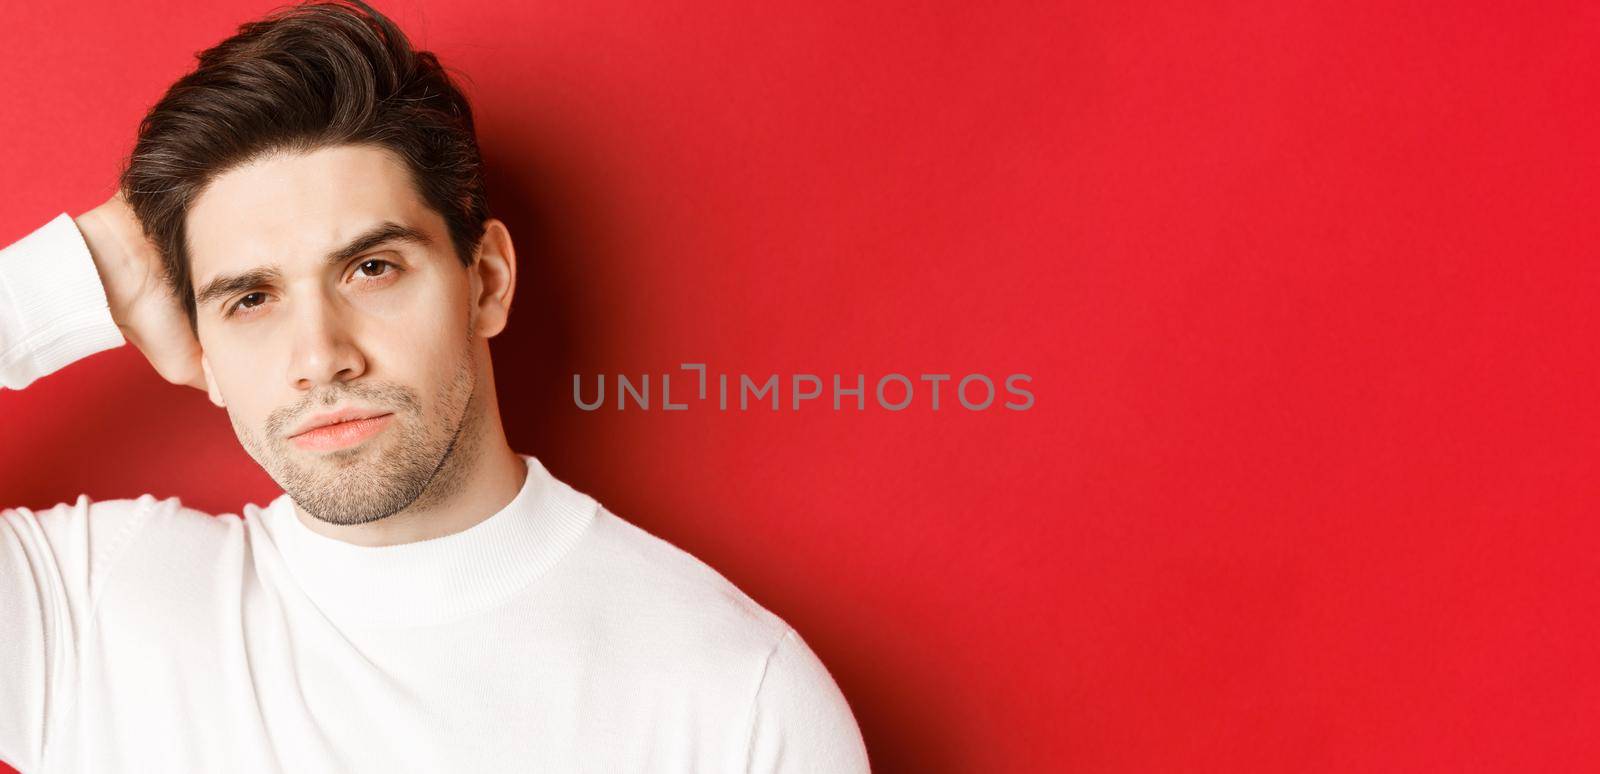 Close-up of handsome brunette man touching his haircut and looking sassy at camera, standing in white sweater over red background.